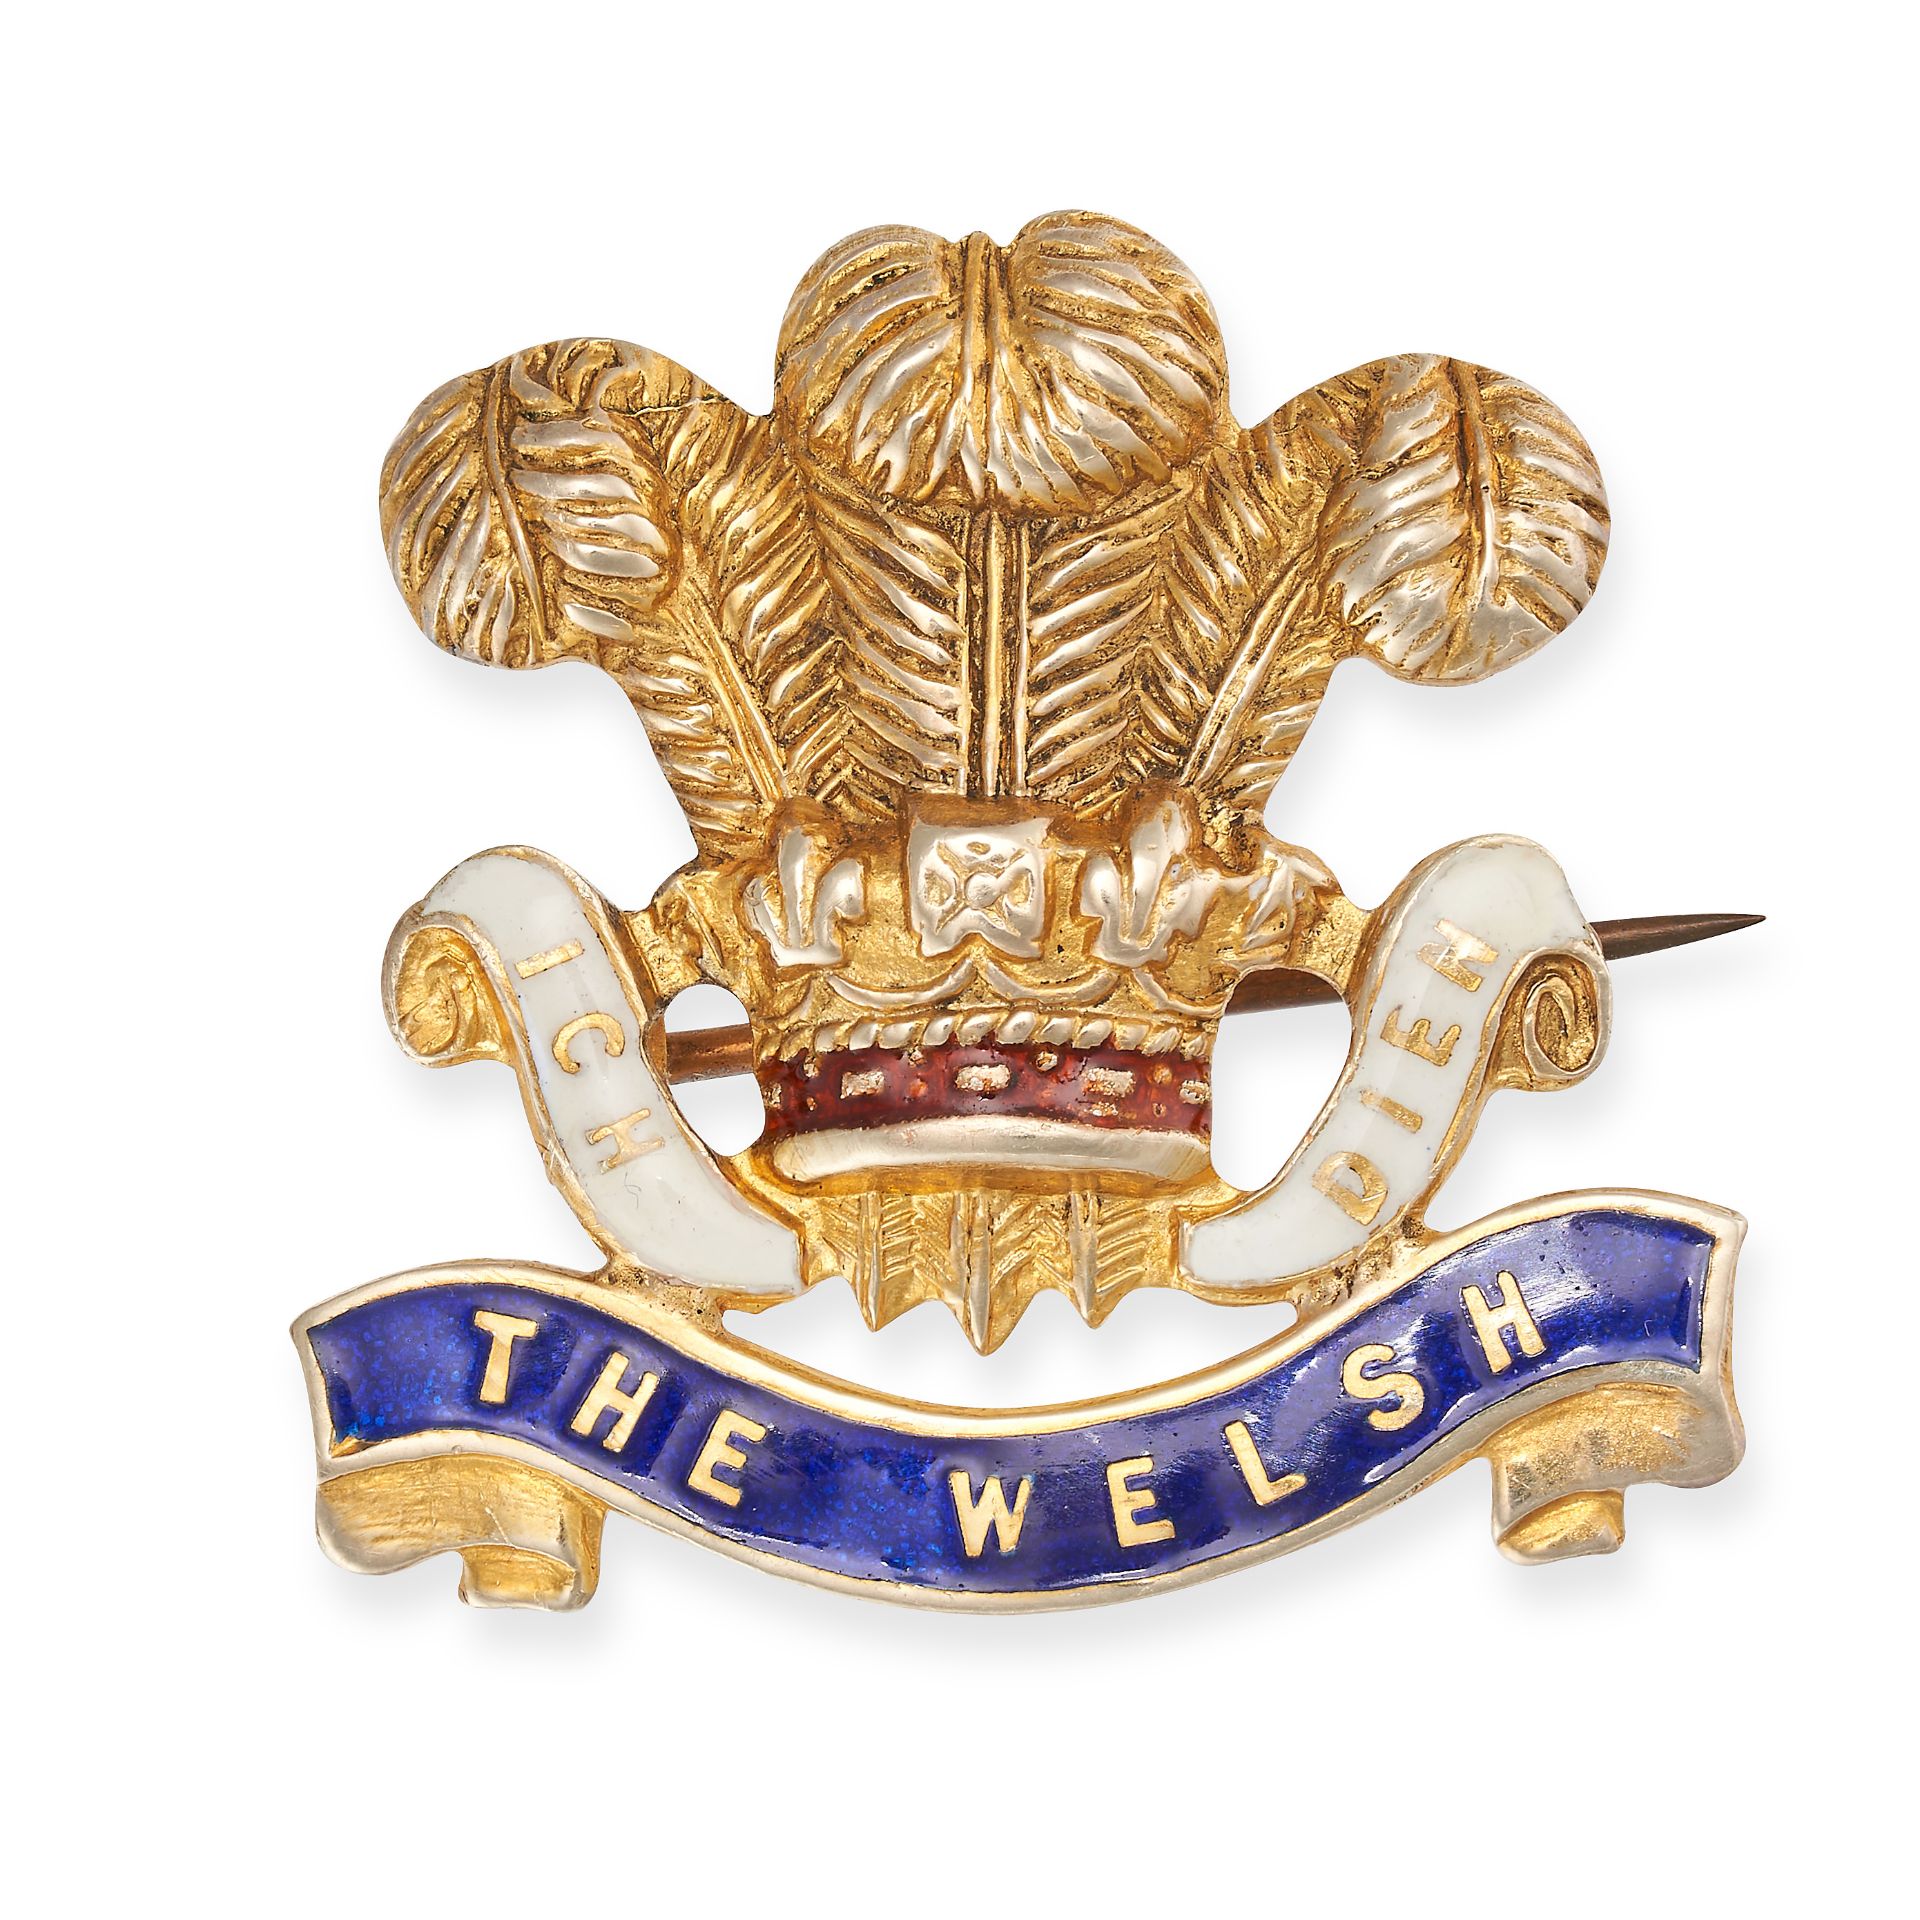 AN ENAMEL ROYAL WELSH REGIMENT BROOCH in 9ct yellow gold, designed as the cap badge of the Royal ...